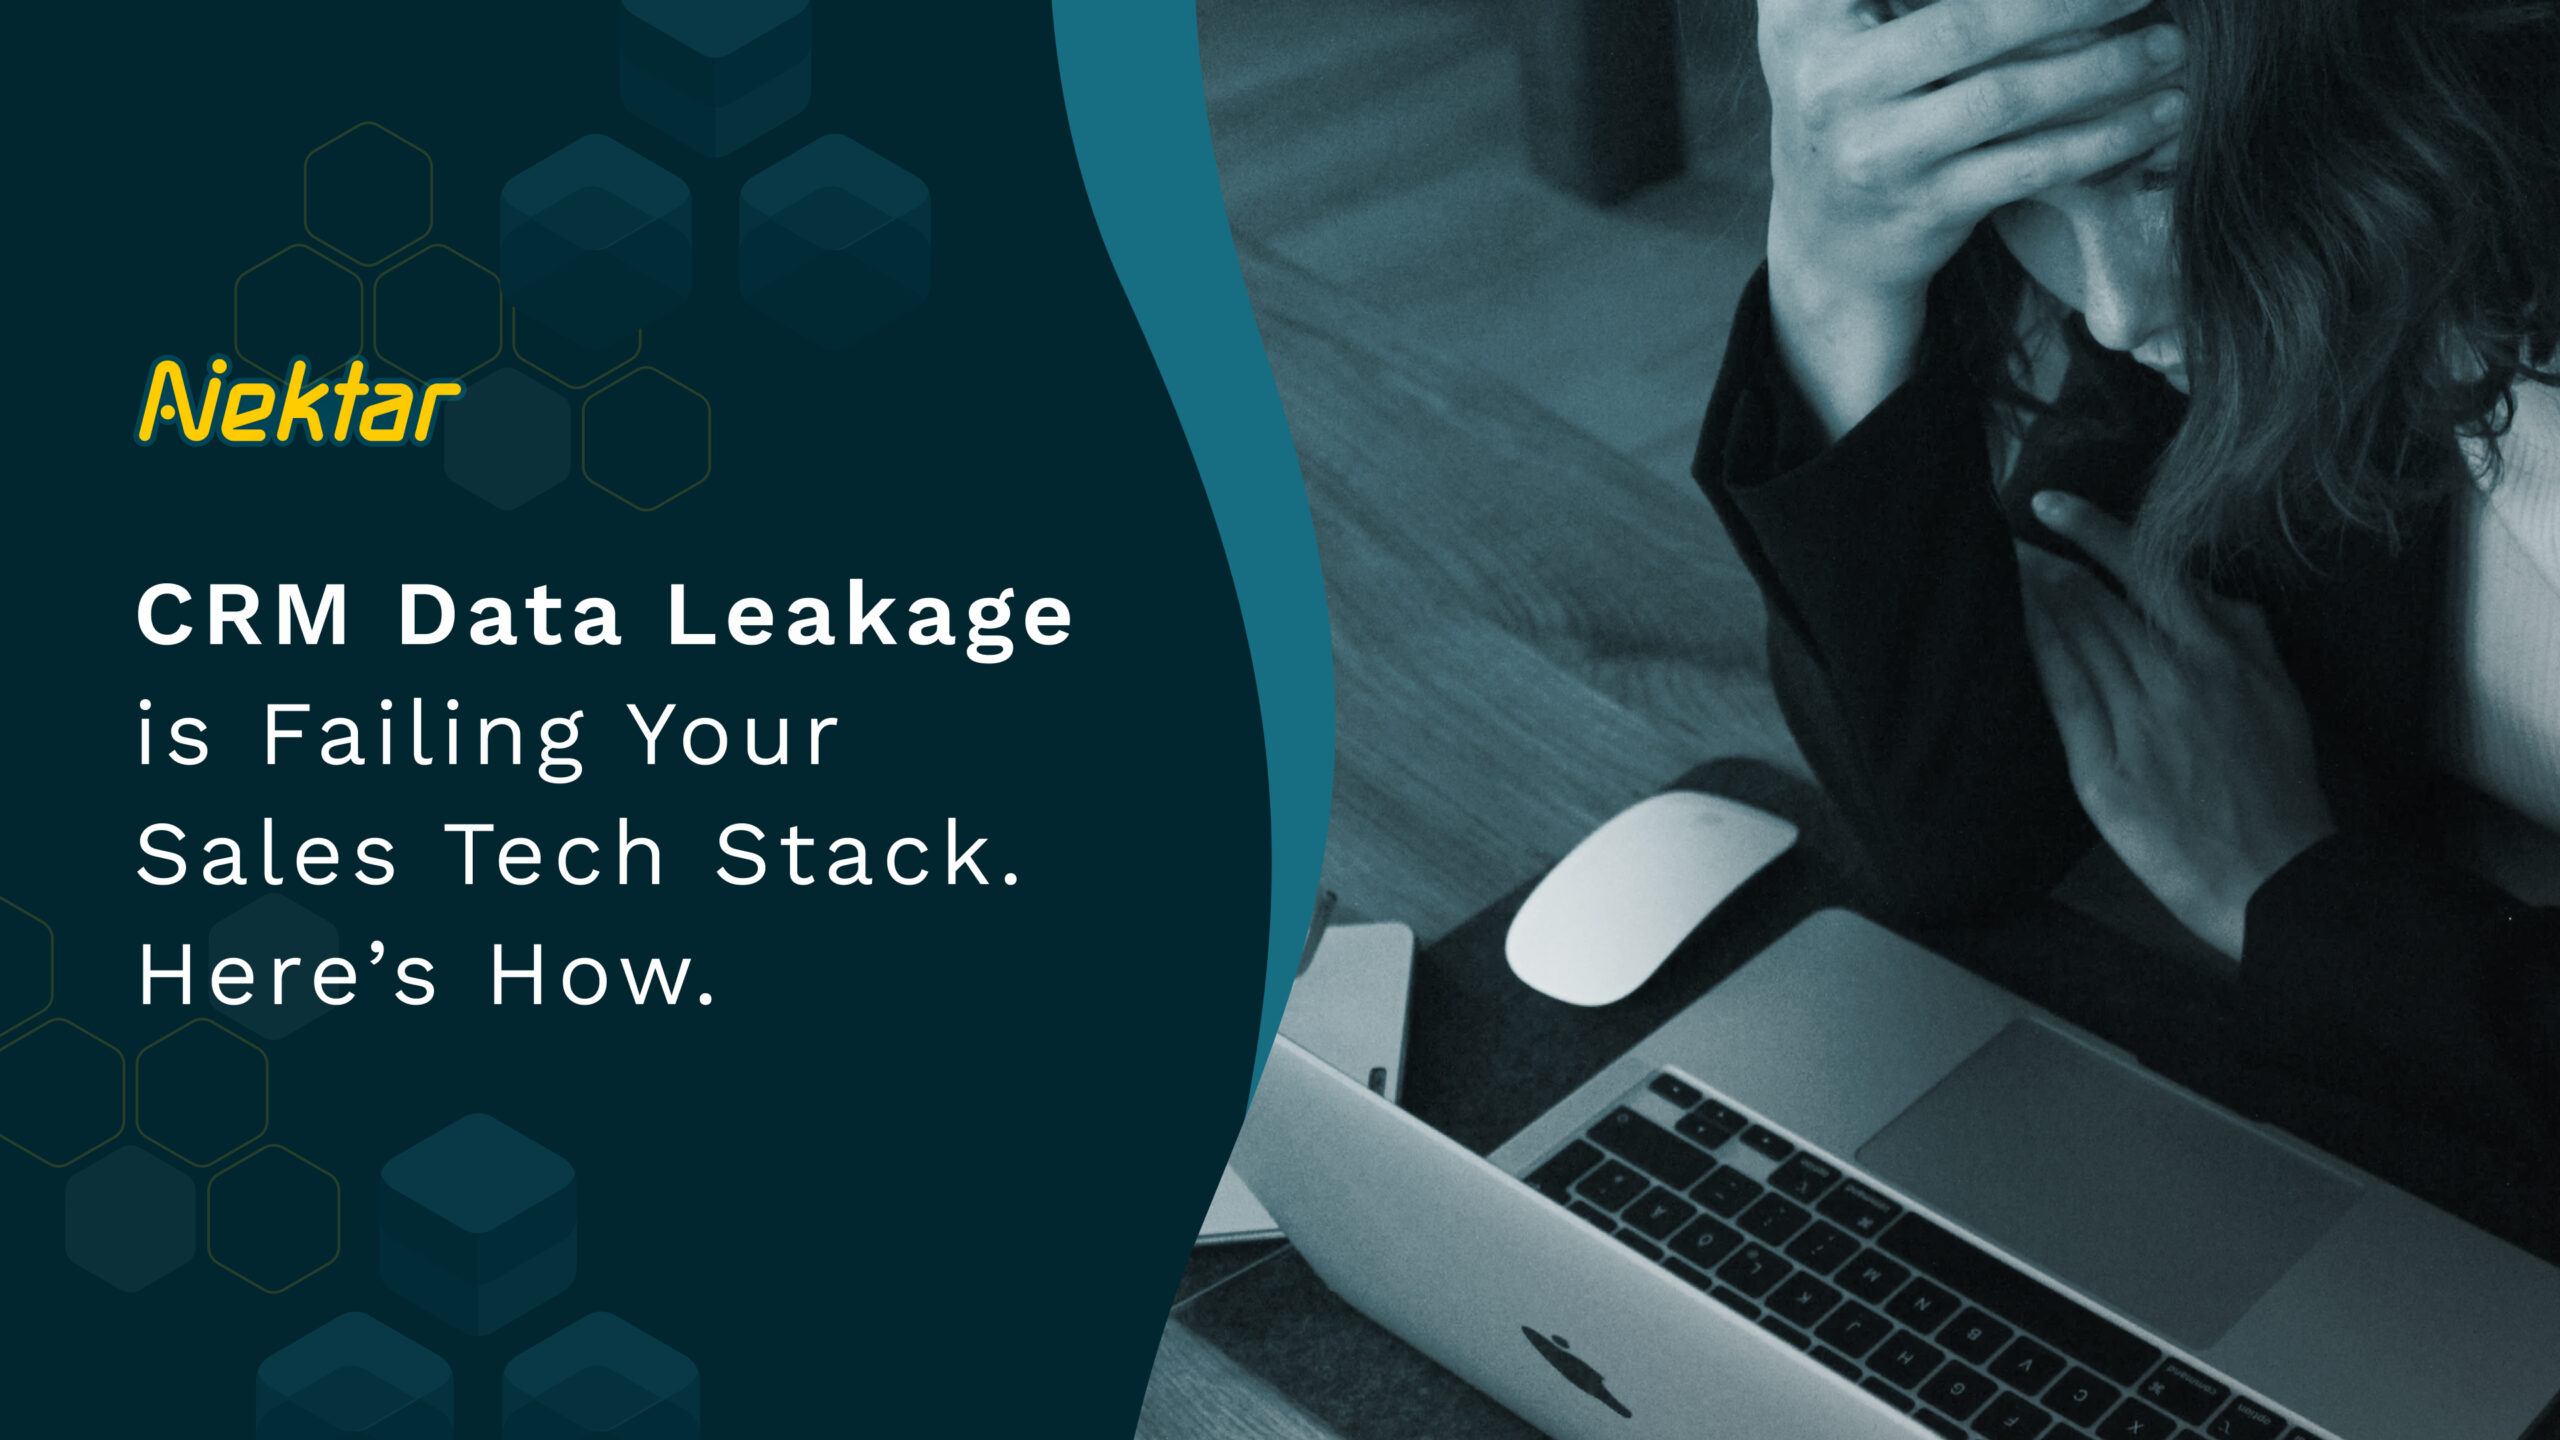 CRM Data Leakage is Failing Your Sales Tech Stack. Here’s How.